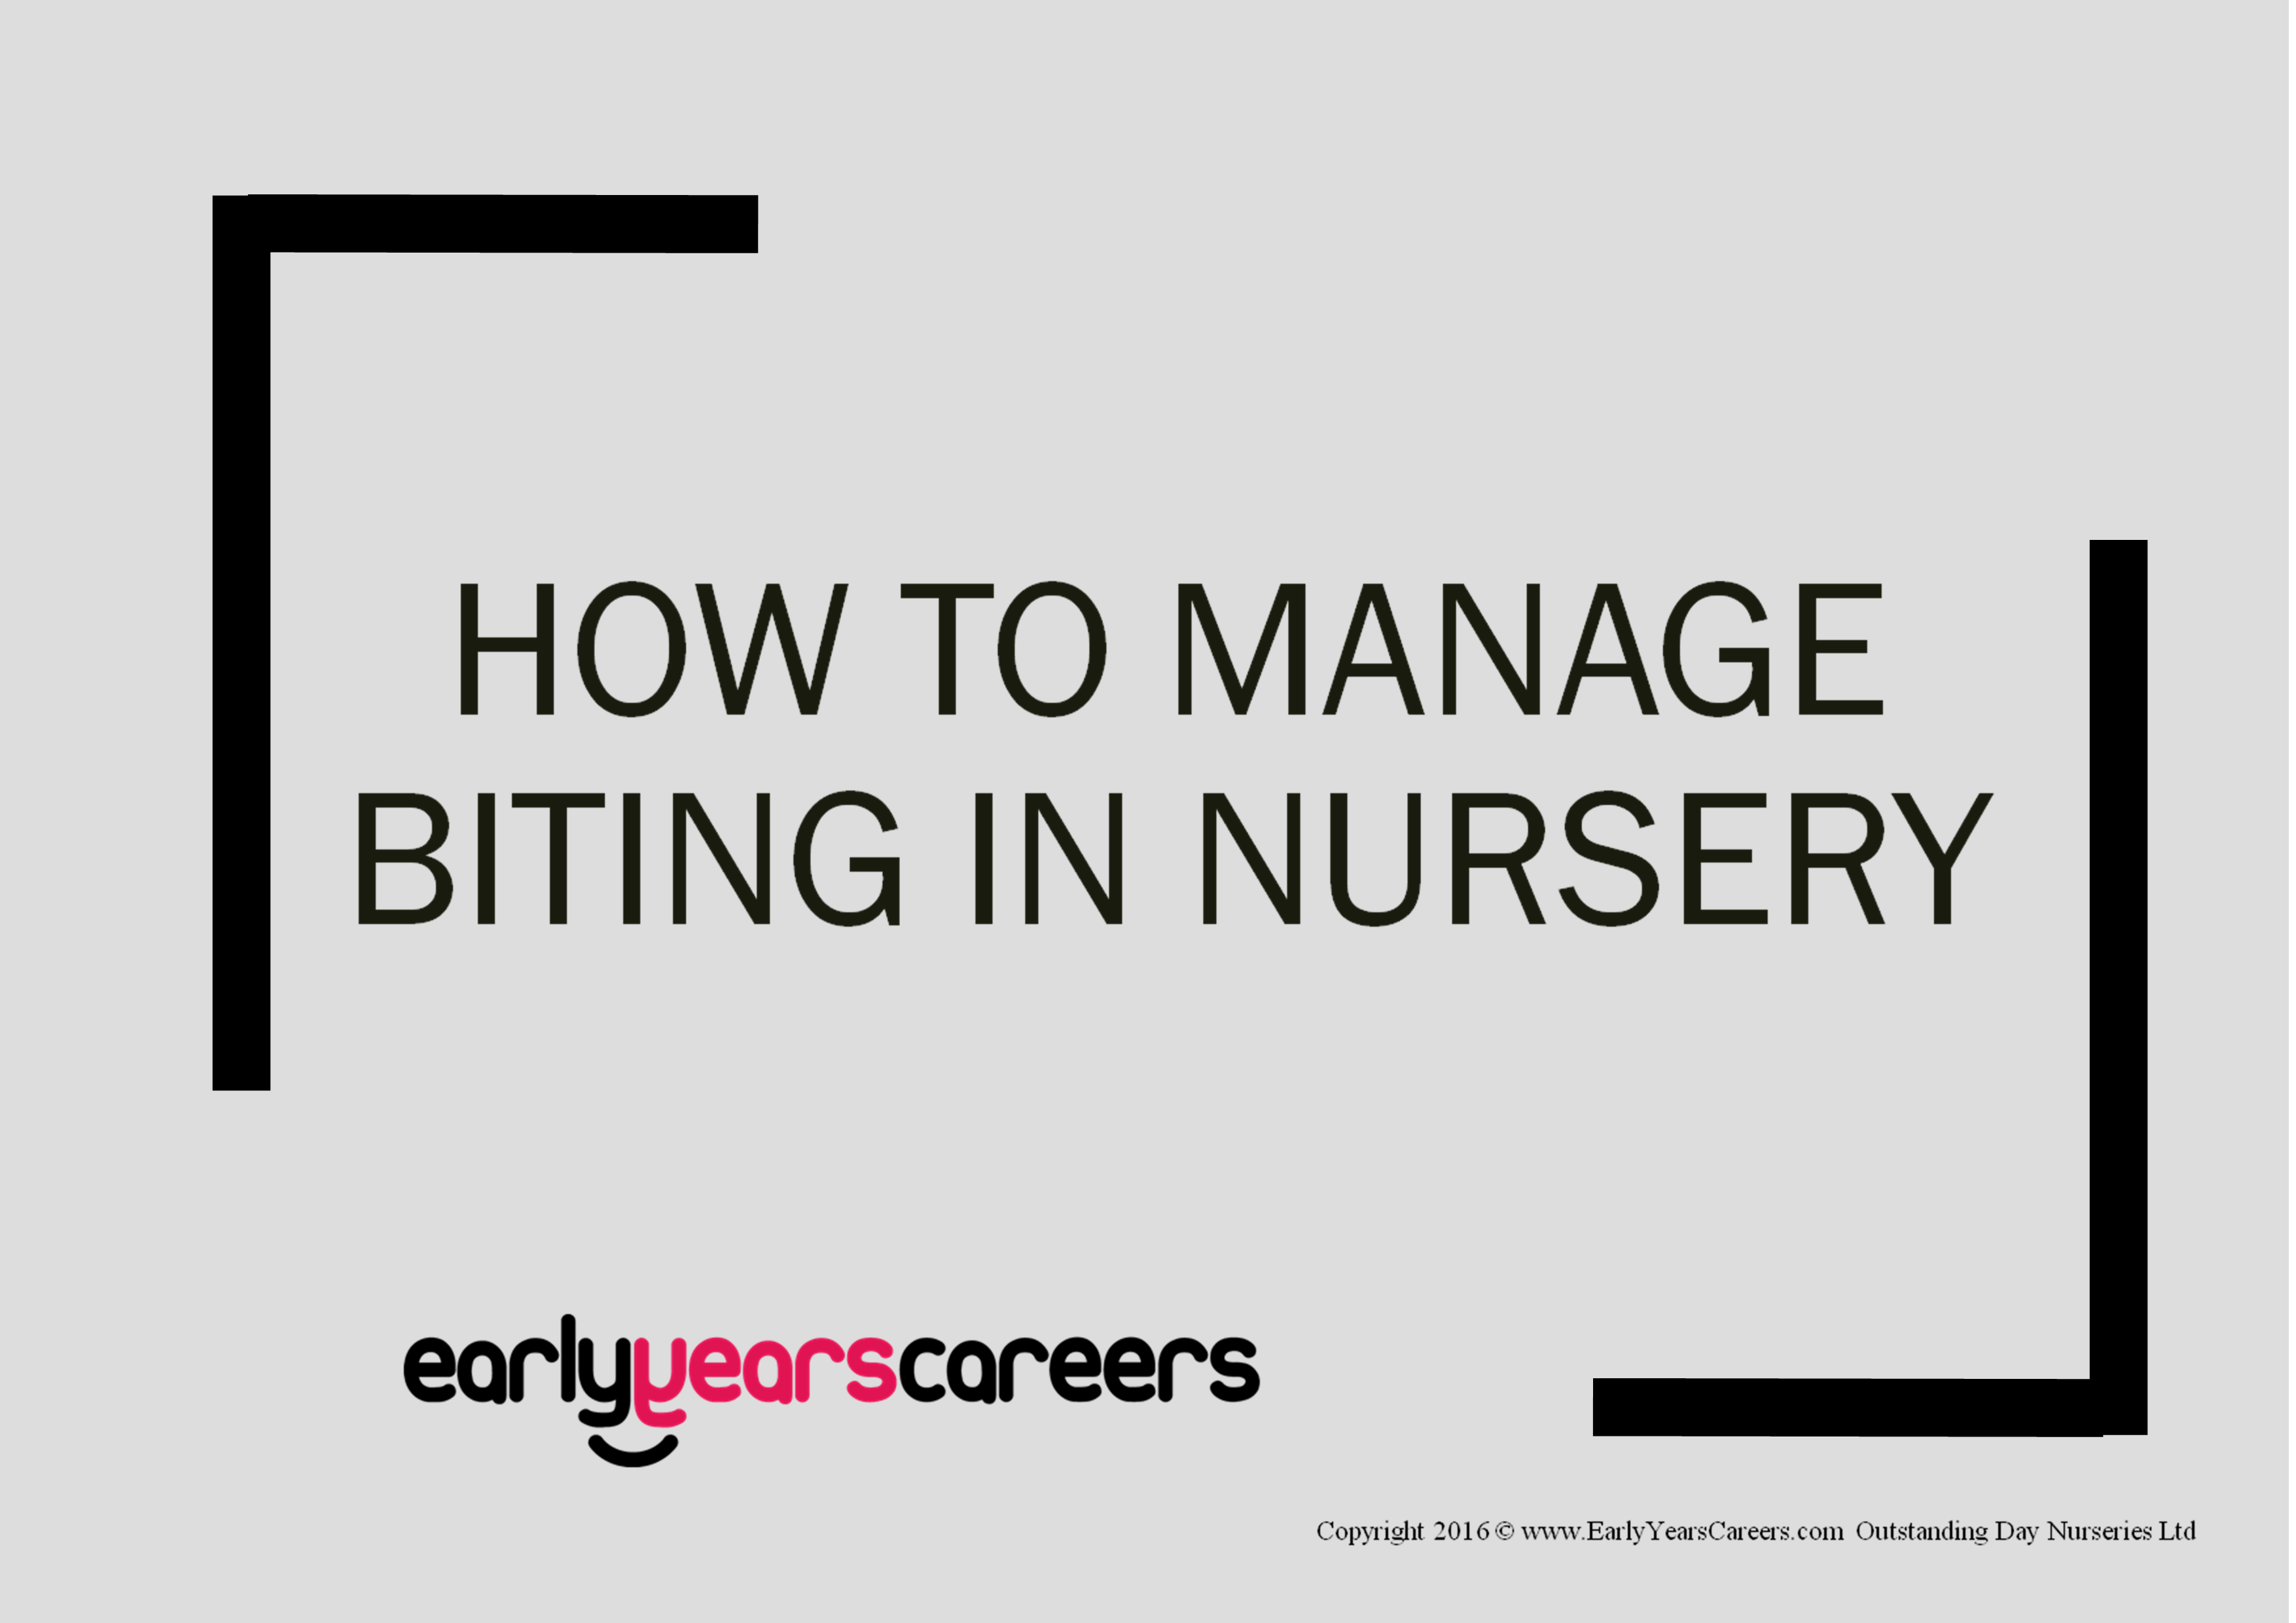 front cover for managing bitting in nursery